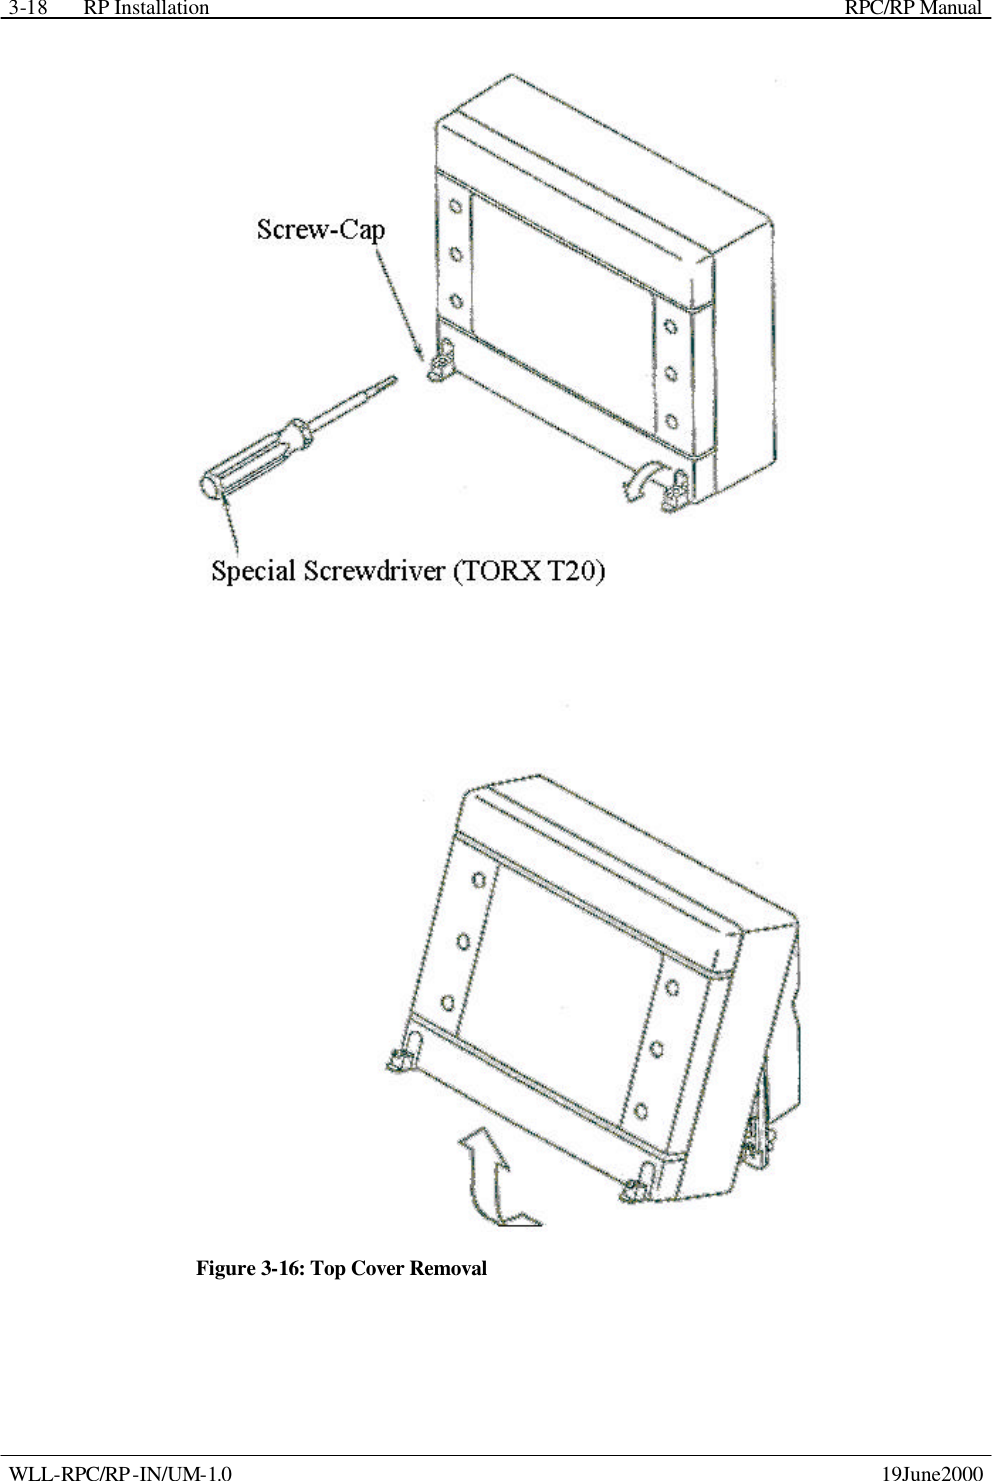 RP Installation    RPC/RP Manual WLL-RPC/RP-IN/UM-1.0    19June2000 3-18 Figure 3-16: Top Cover Removal  